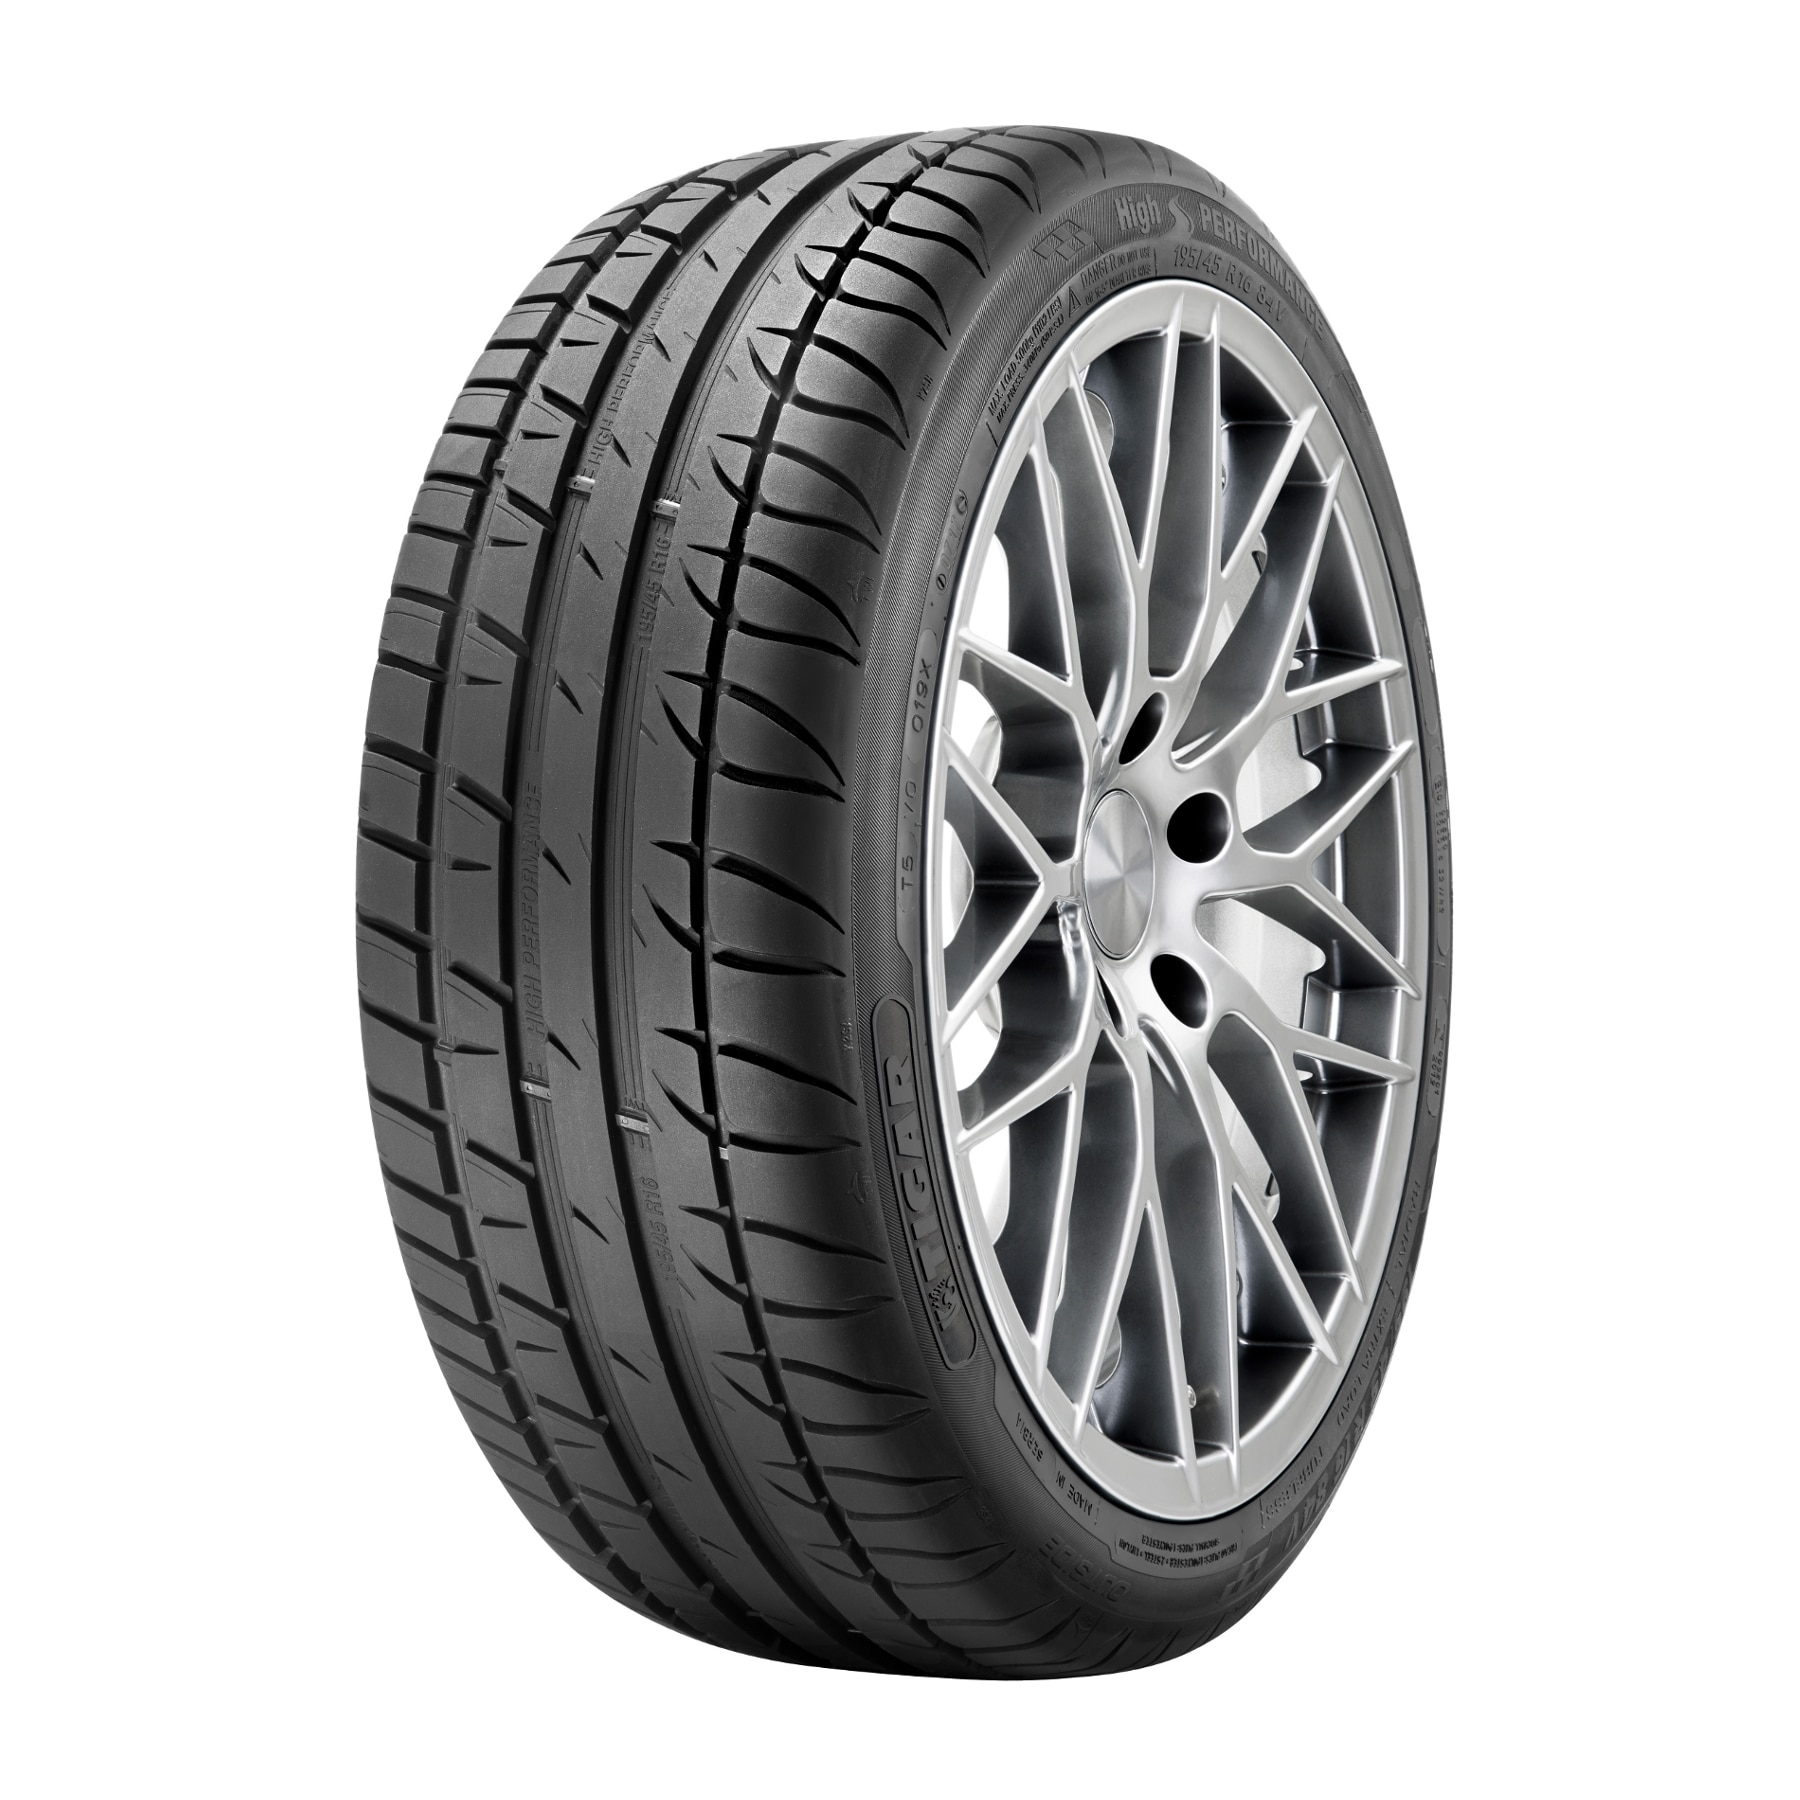 Peace of mind Fellow Attend Anvelopa vara Tigar High Performance 215/55 R16 93V - eMAG.ro